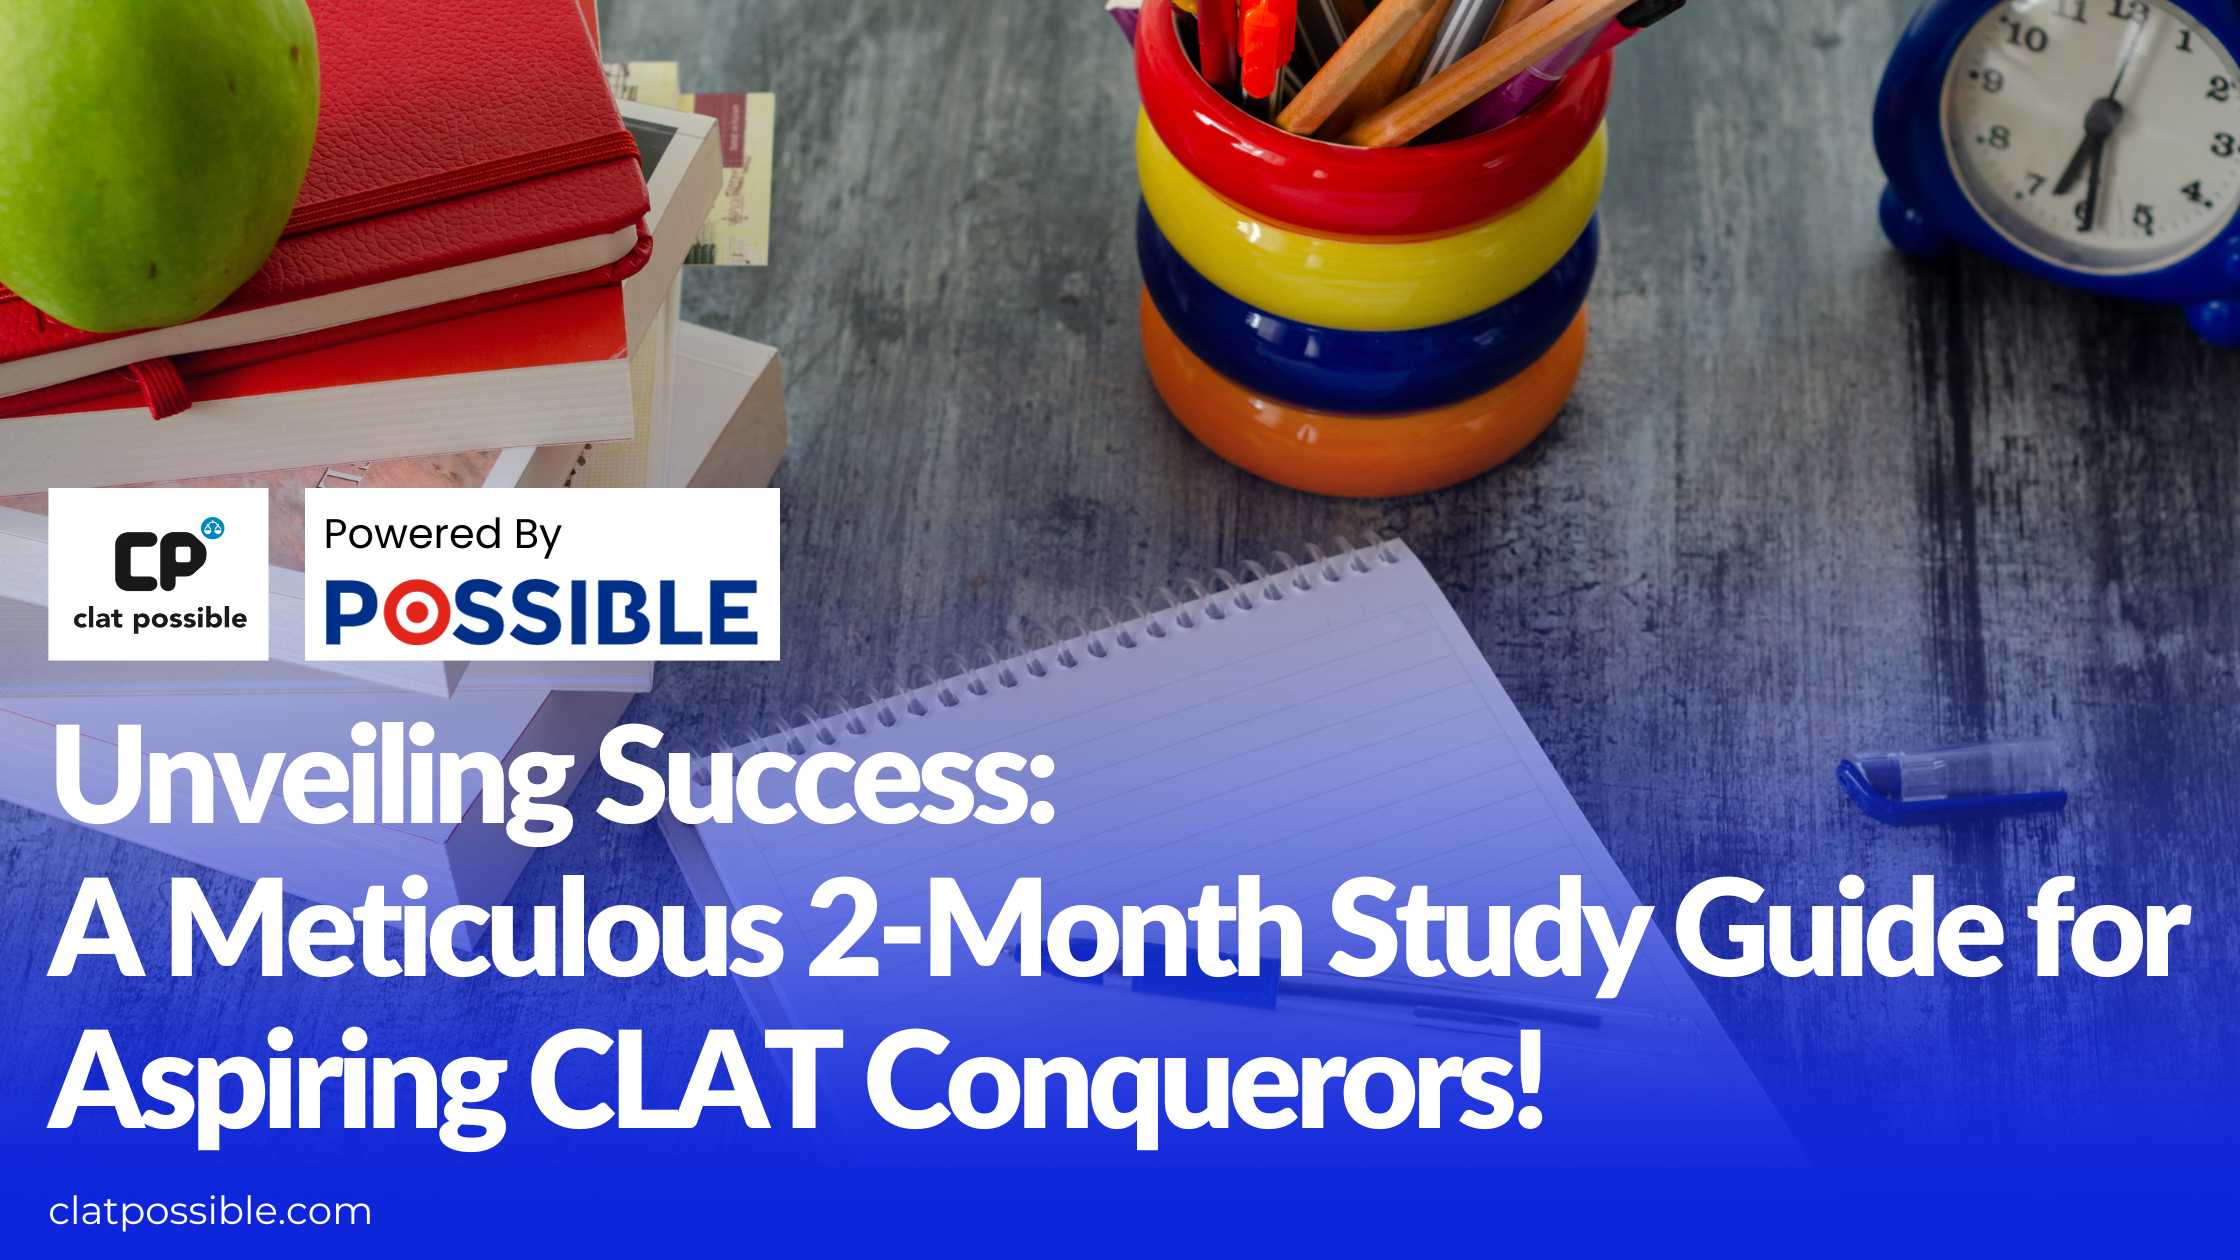 2-Month Study Guide for Aspiring CLAT Conquerors